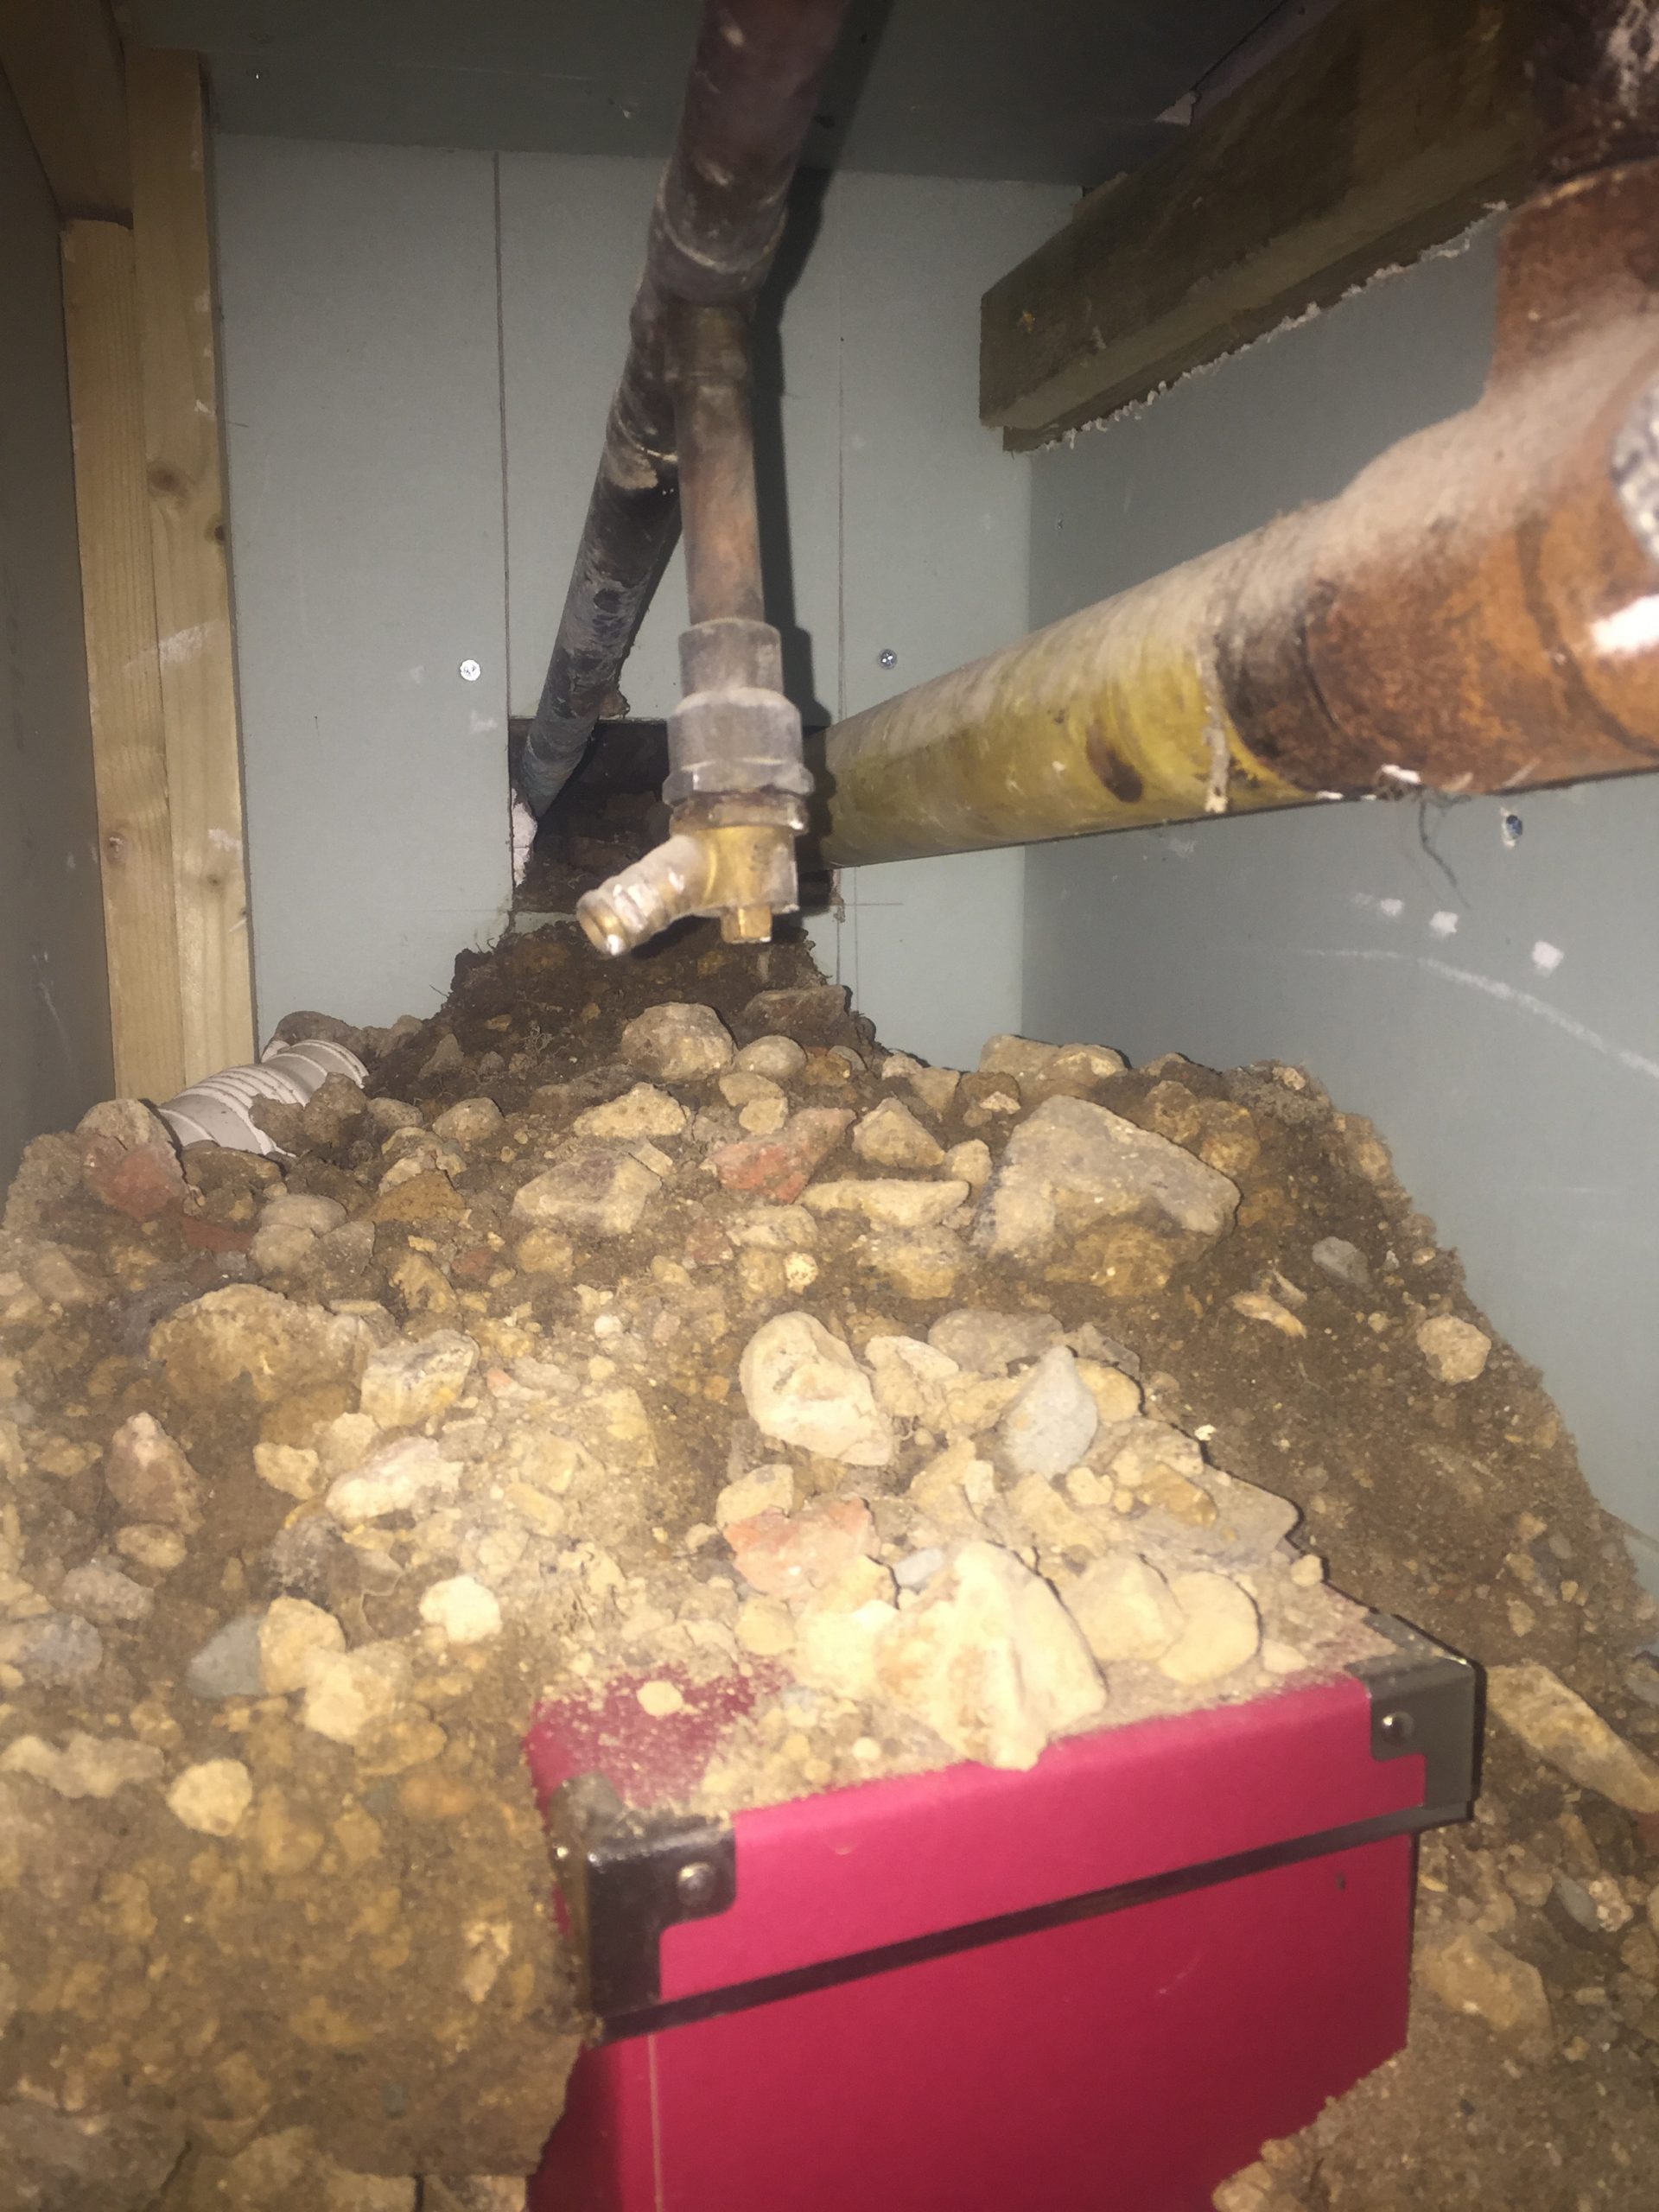 Image of excavations under a house caused by rats